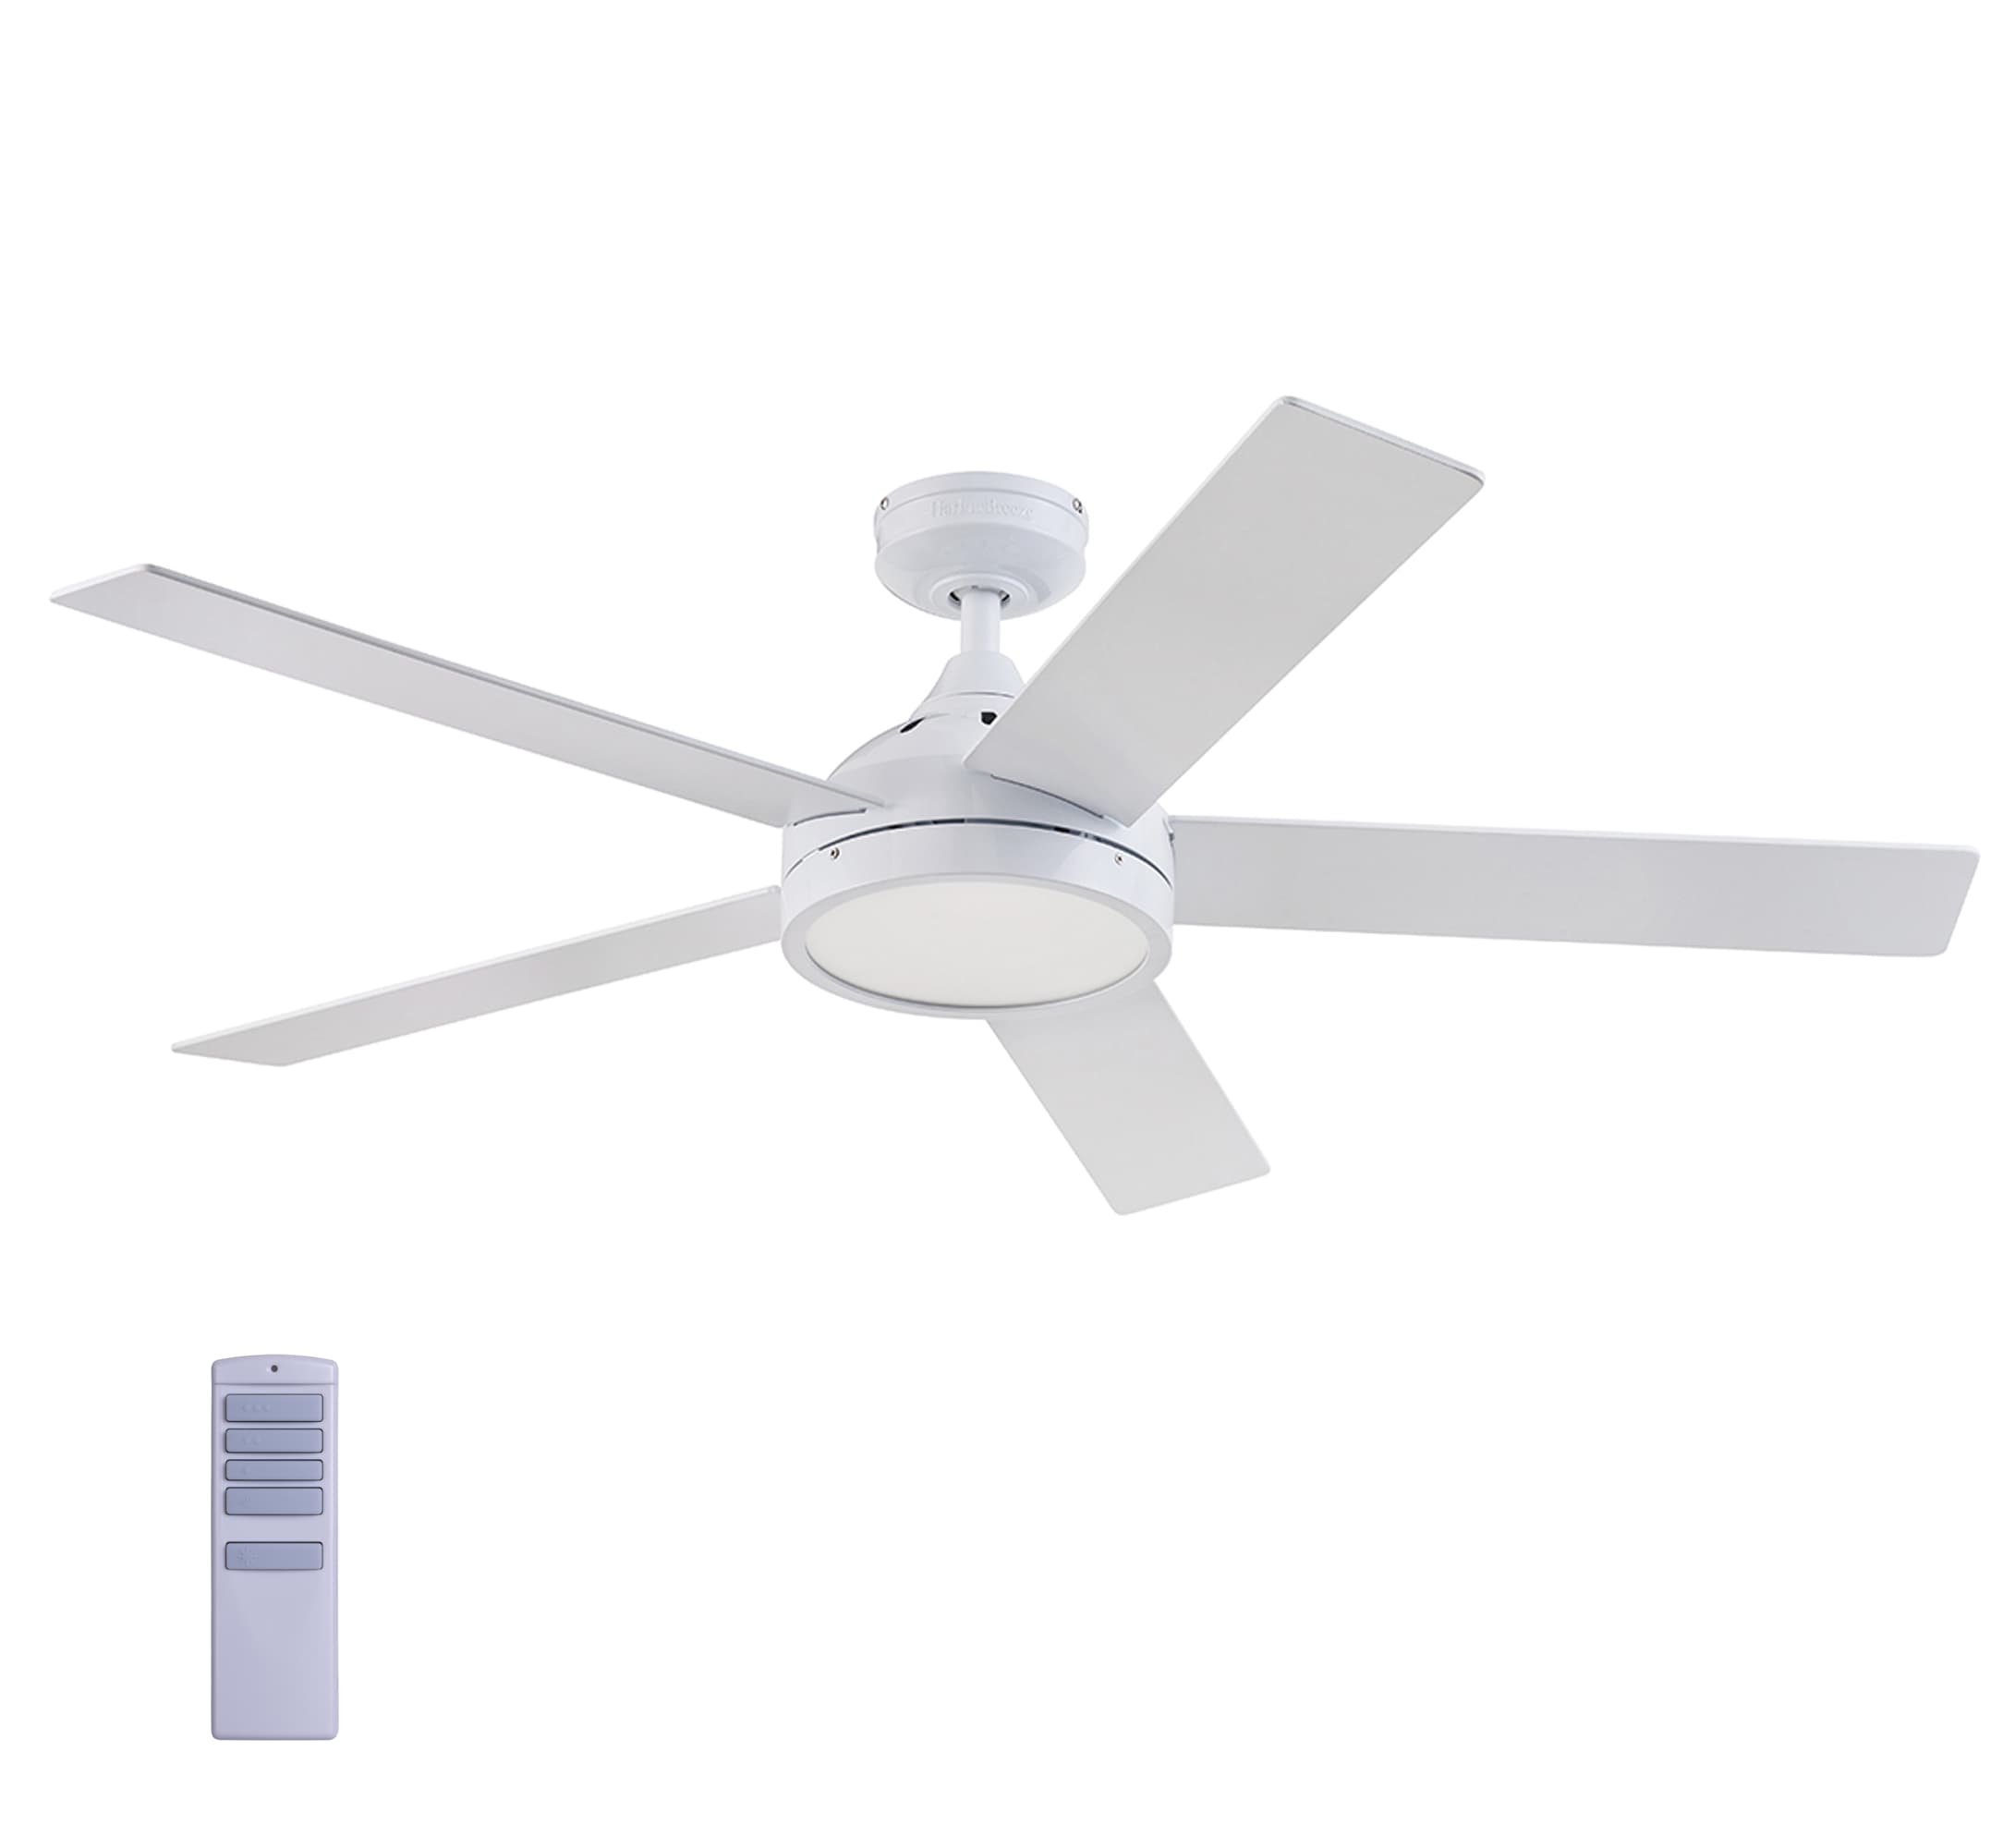 Harbor Breeze Camden 52 In White Indoor Ceiling Fan With Light And Remote 5 Blade The Fans Department At Lowes Com